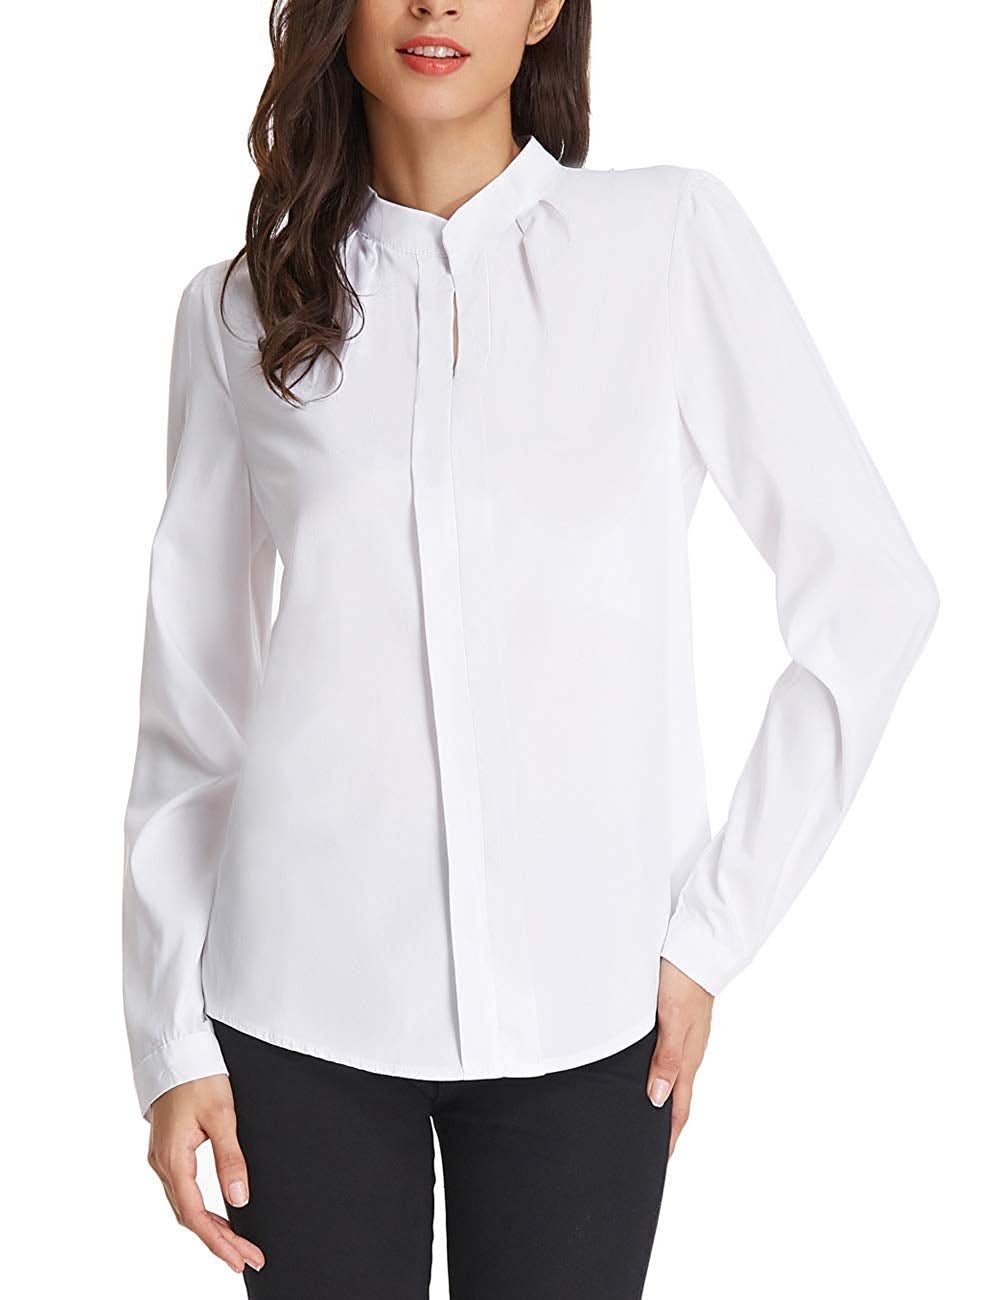 Women’s Long Sleeve Stand Collar Office Formal Casual Shirt Blouse